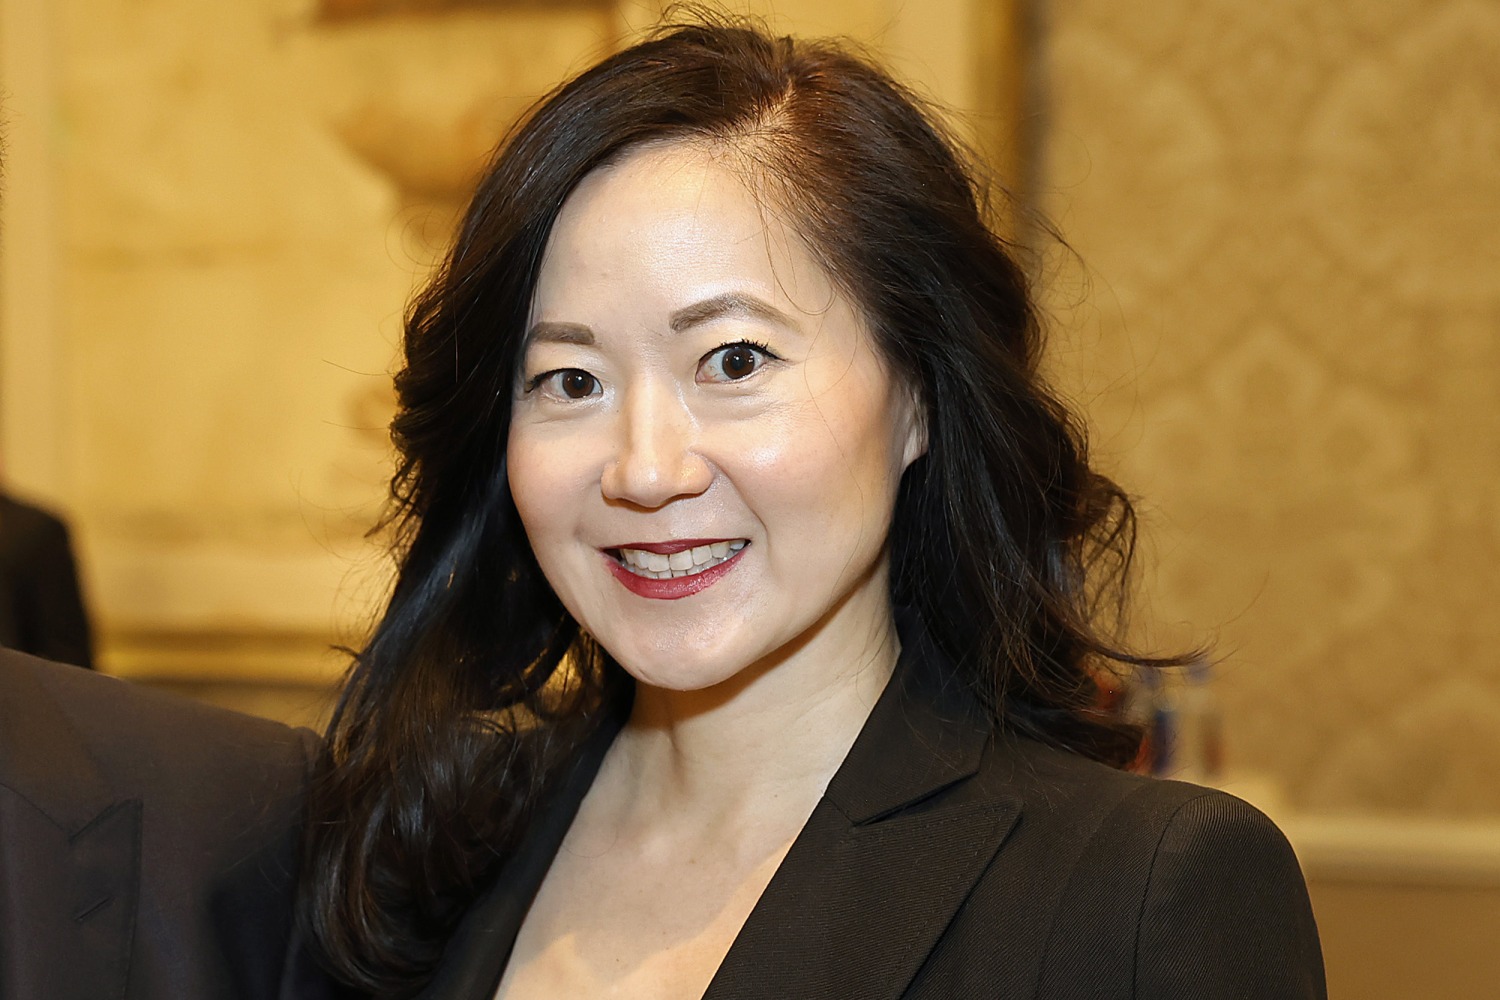 Angela Chao, shipping CEO and sister of Elaine Chao, dies in a car accident – NBC News